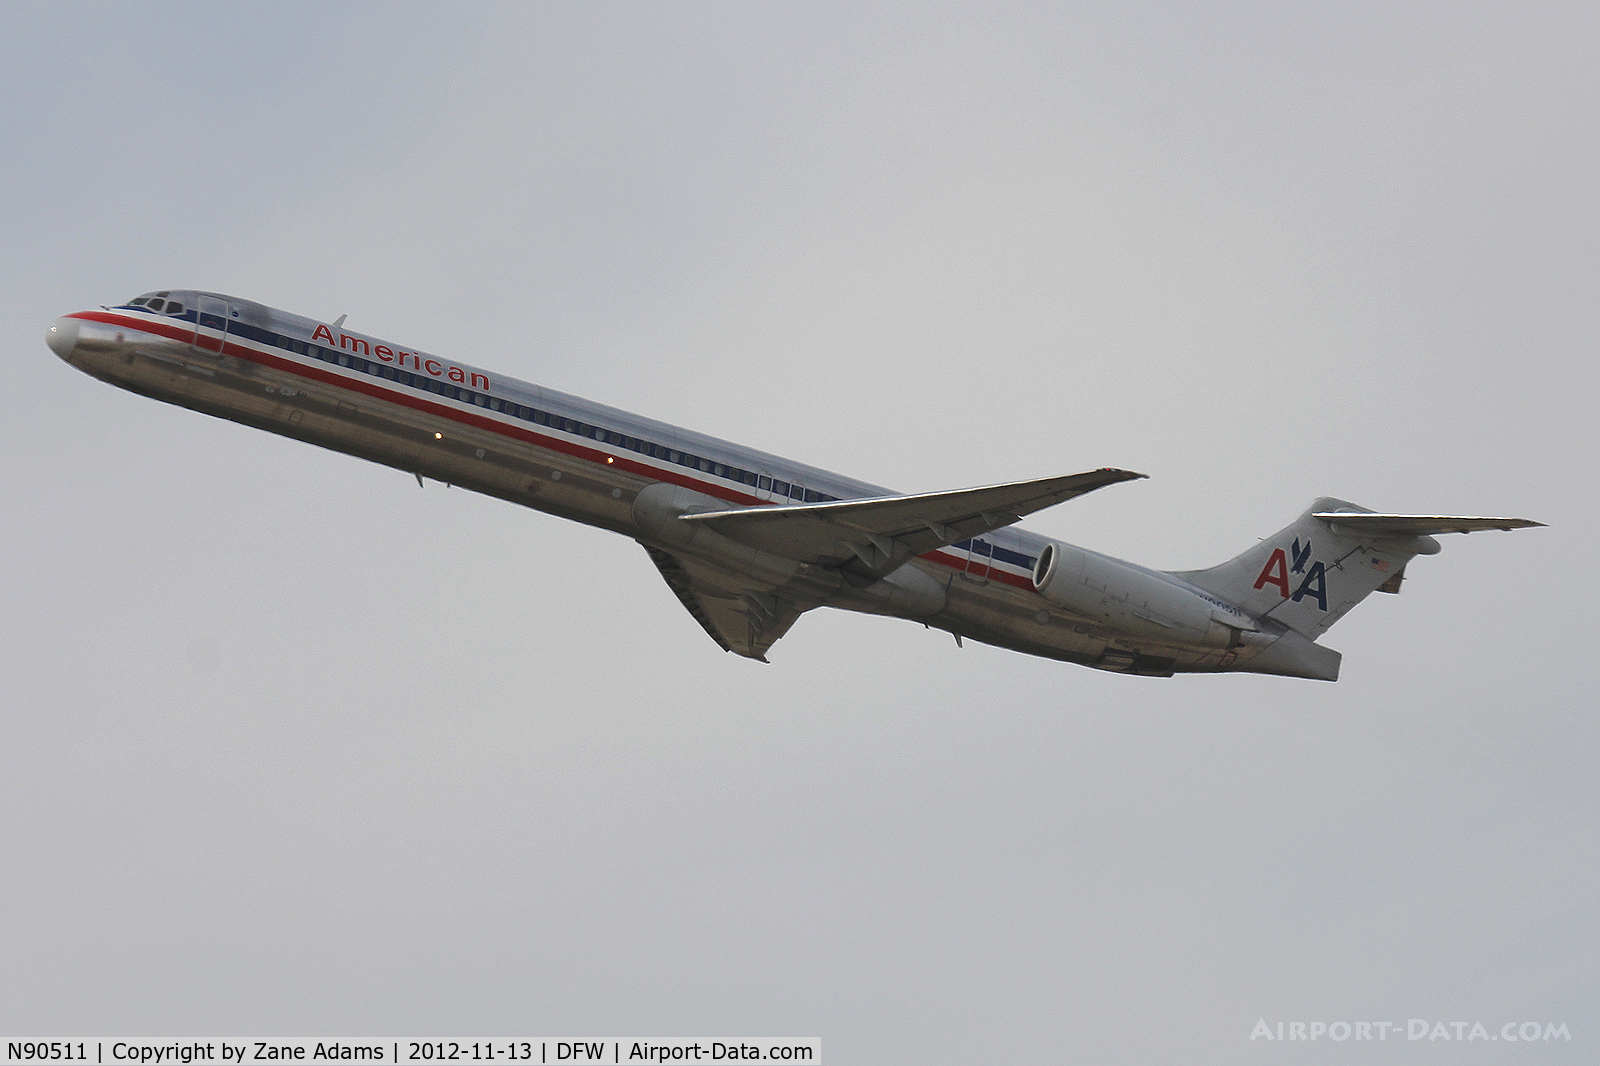 N90511, 1989 McDonnell Douglas MD-82 (DC-9-82) C/N 49805, American Airlines departing DFW Airport